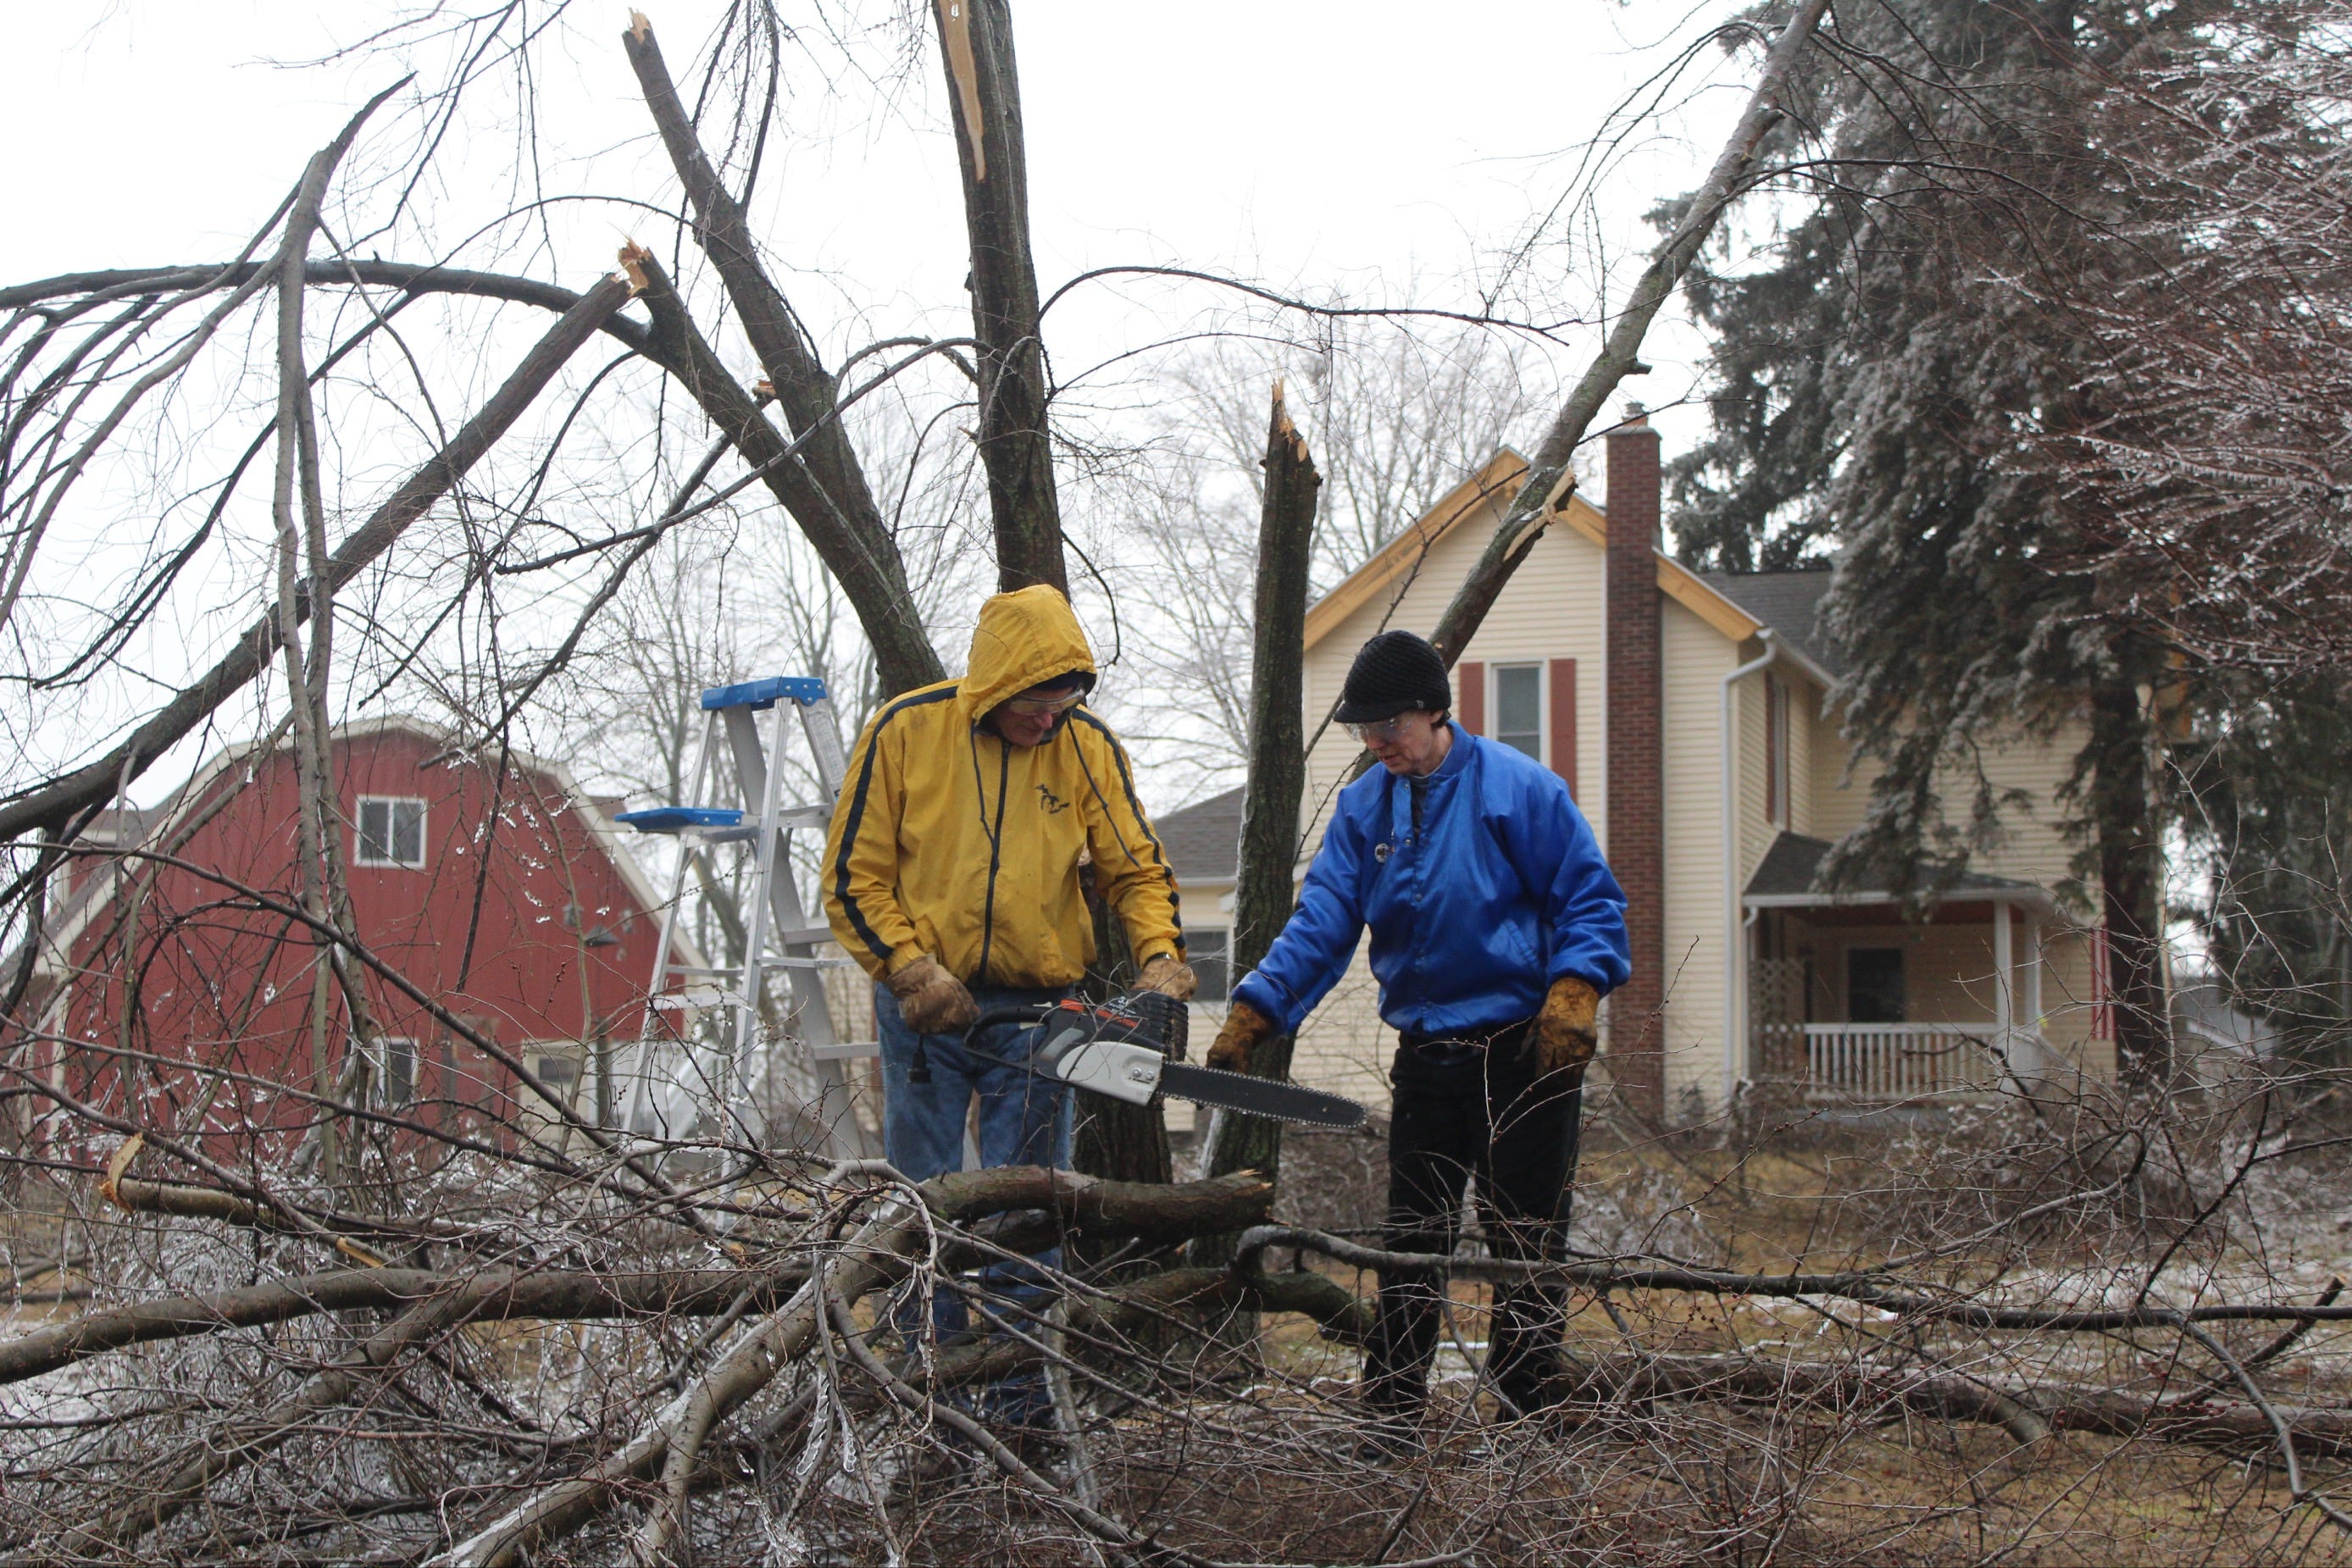 Philip and Madeleine Macy clean up their yard in Ypsilanti after a storm ripped through the surrounding trees, Feb. 23, 2023.